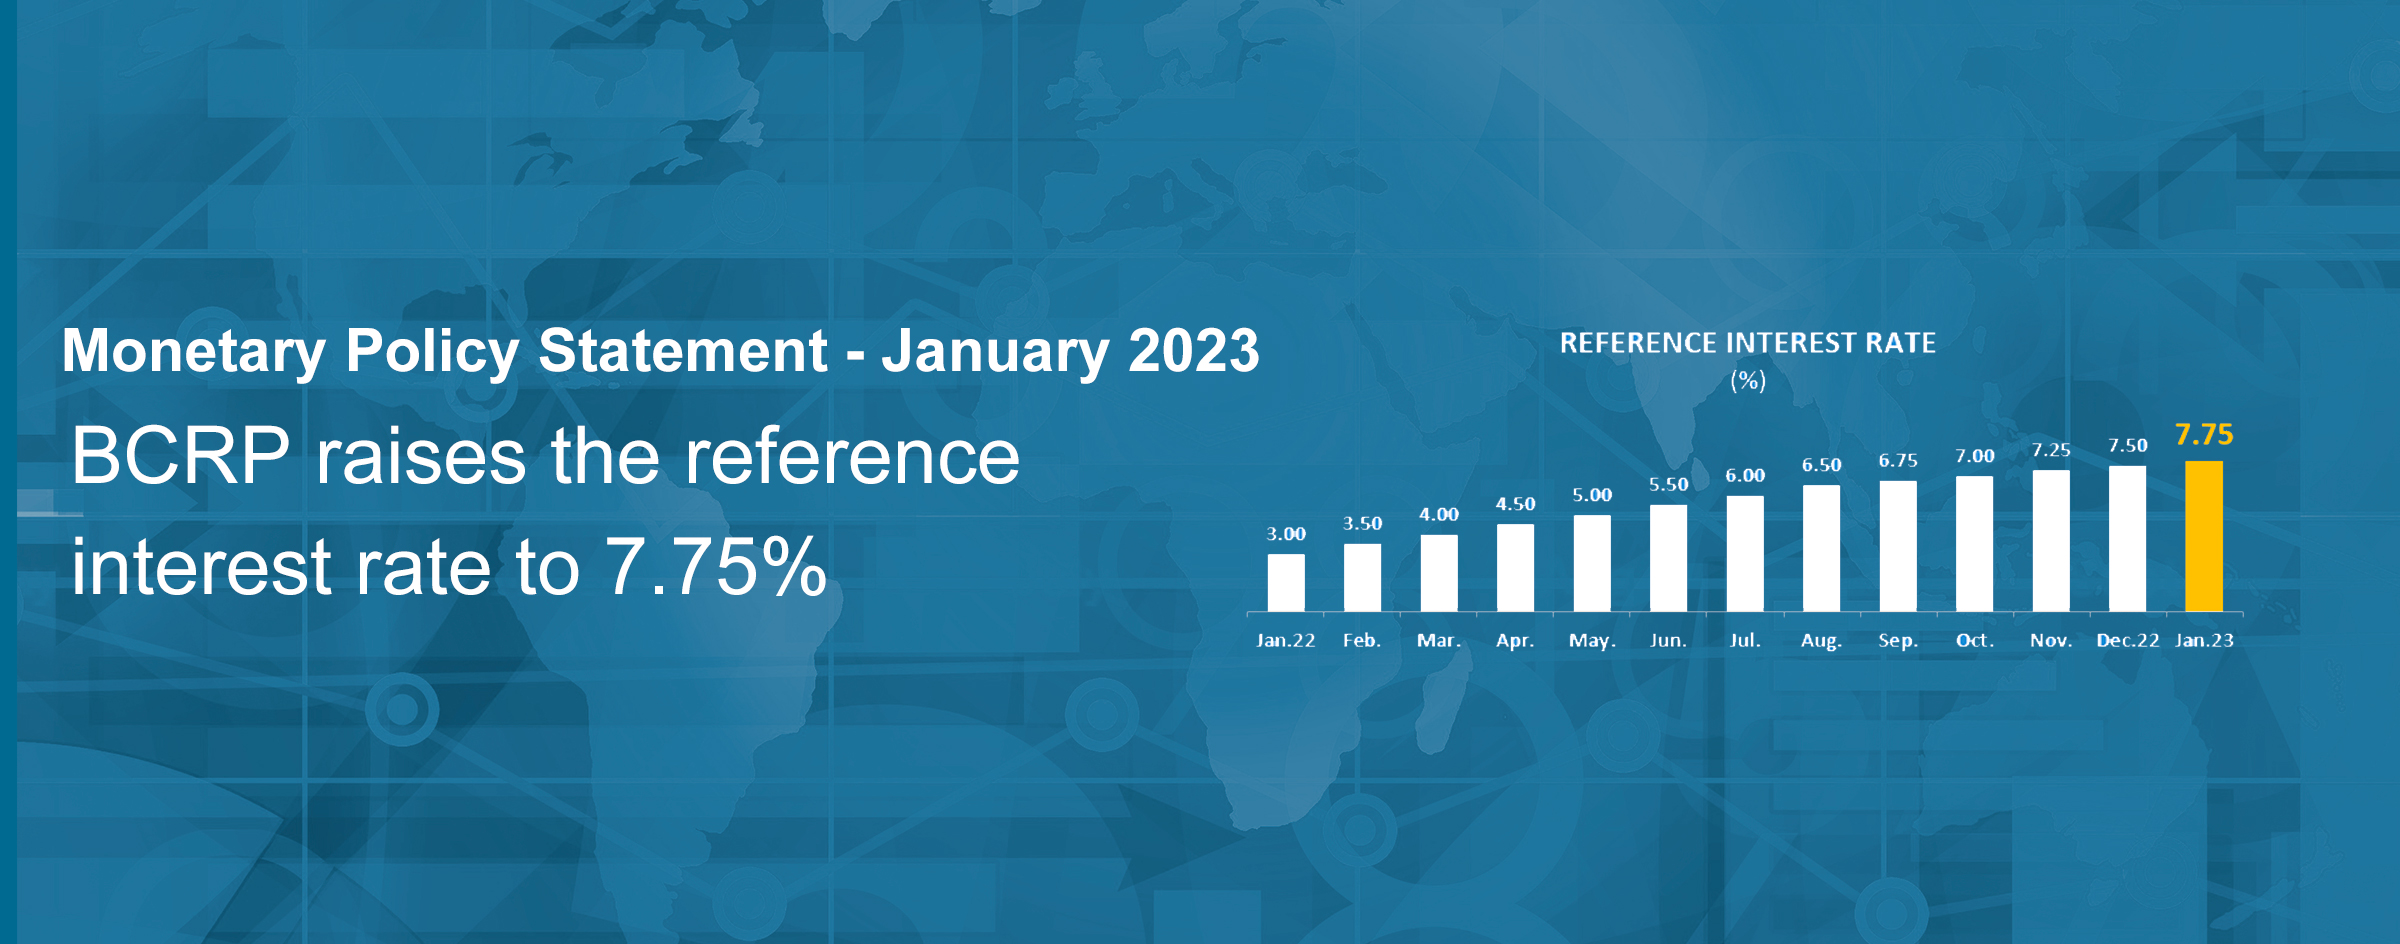 Monetary policy statement January 2023: BCRP raises reference rate to 7.75%